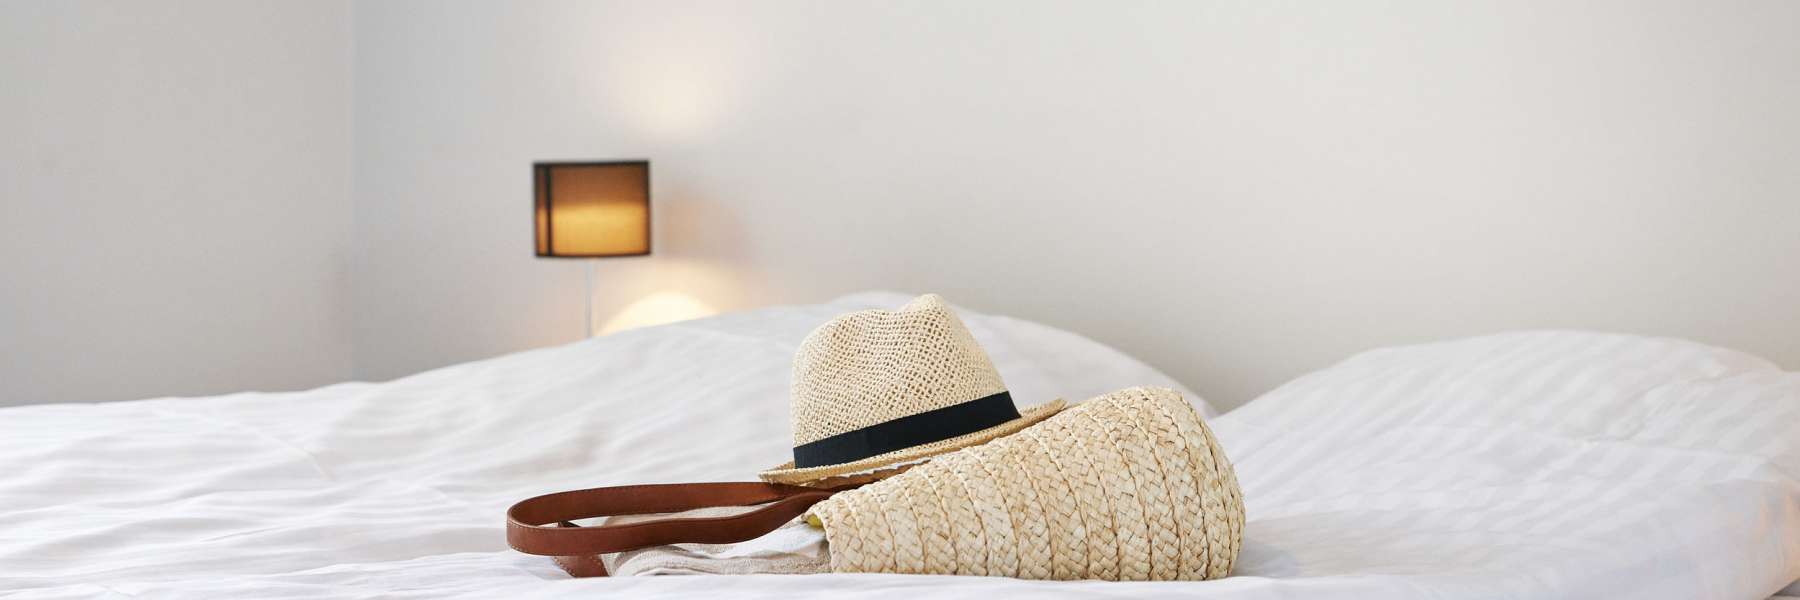 Bag with blanket and hat on bed